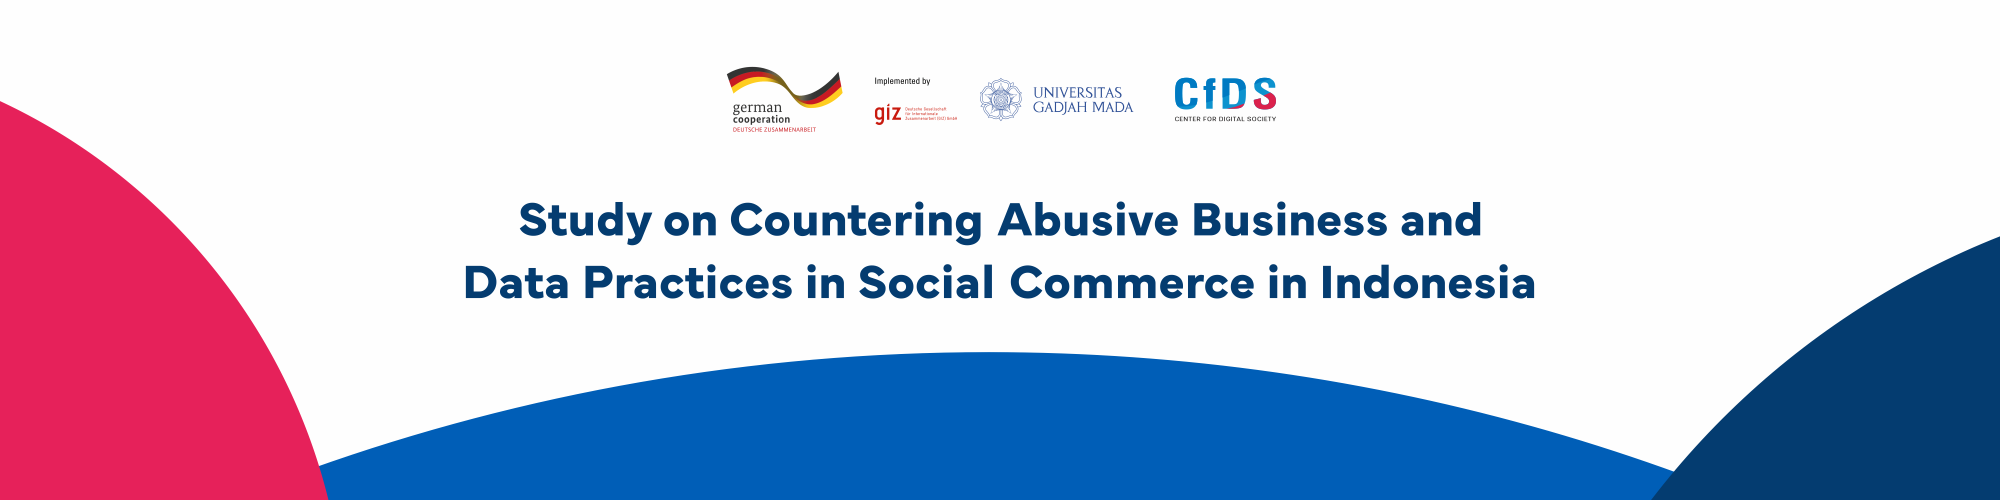 Study on Countering Abusive Business and Data Practices in Social Commerce in Indonesia